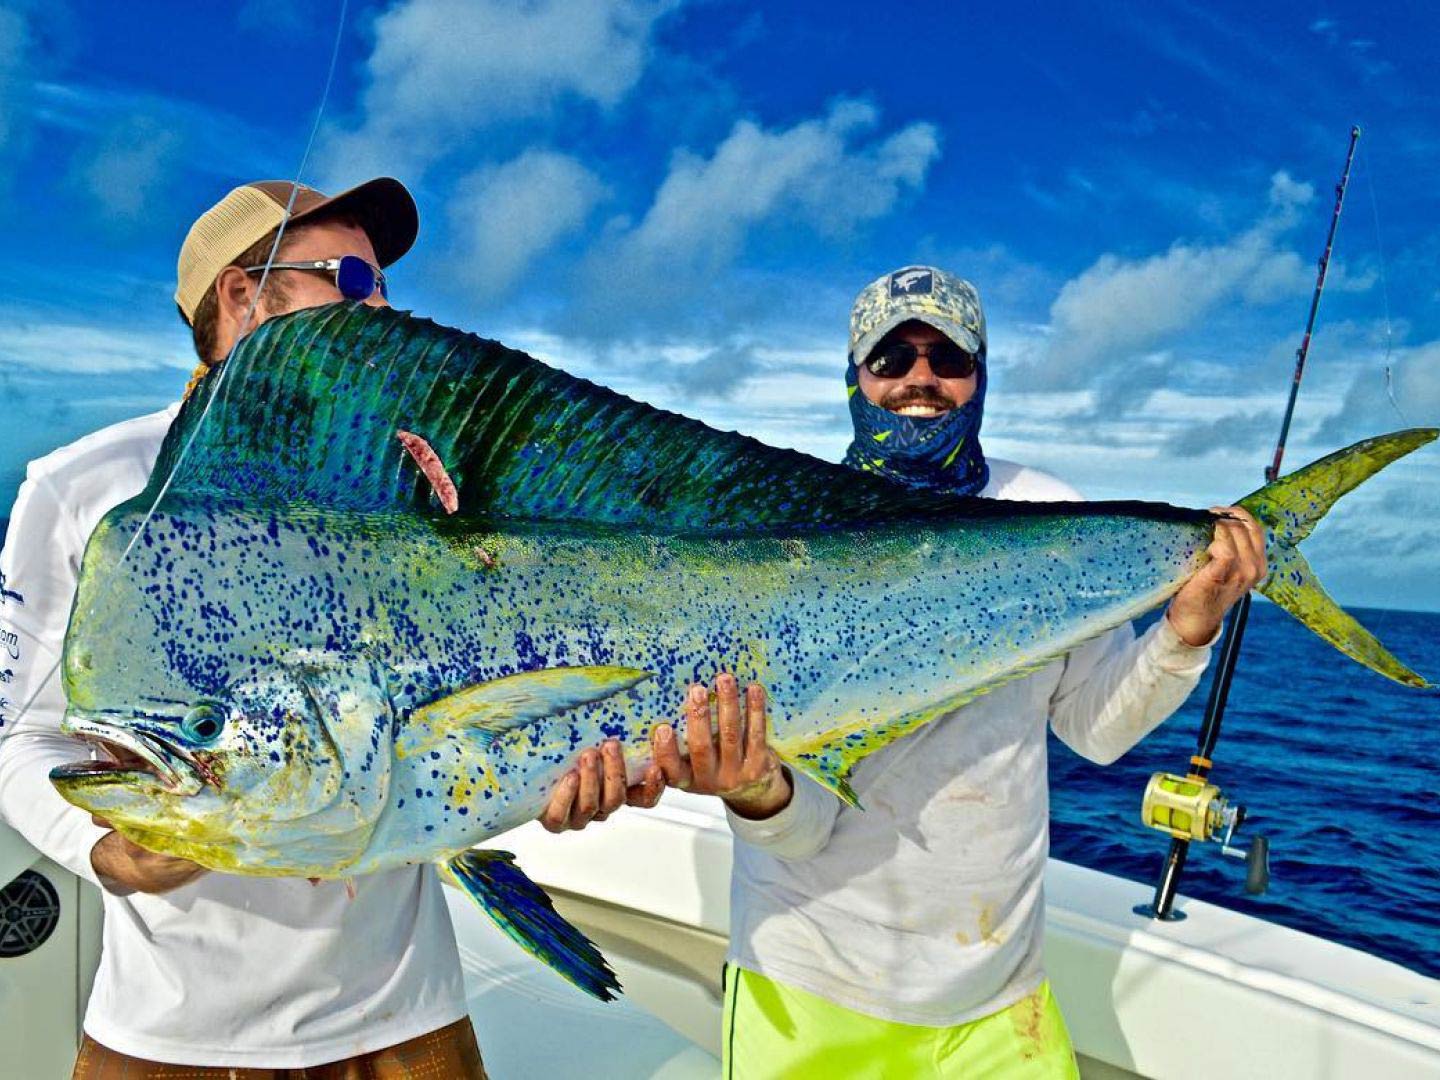 Two men on an offshore sportfishing vessel wearing hats and sunglasses, smiling and holding a large Mahi Mahi